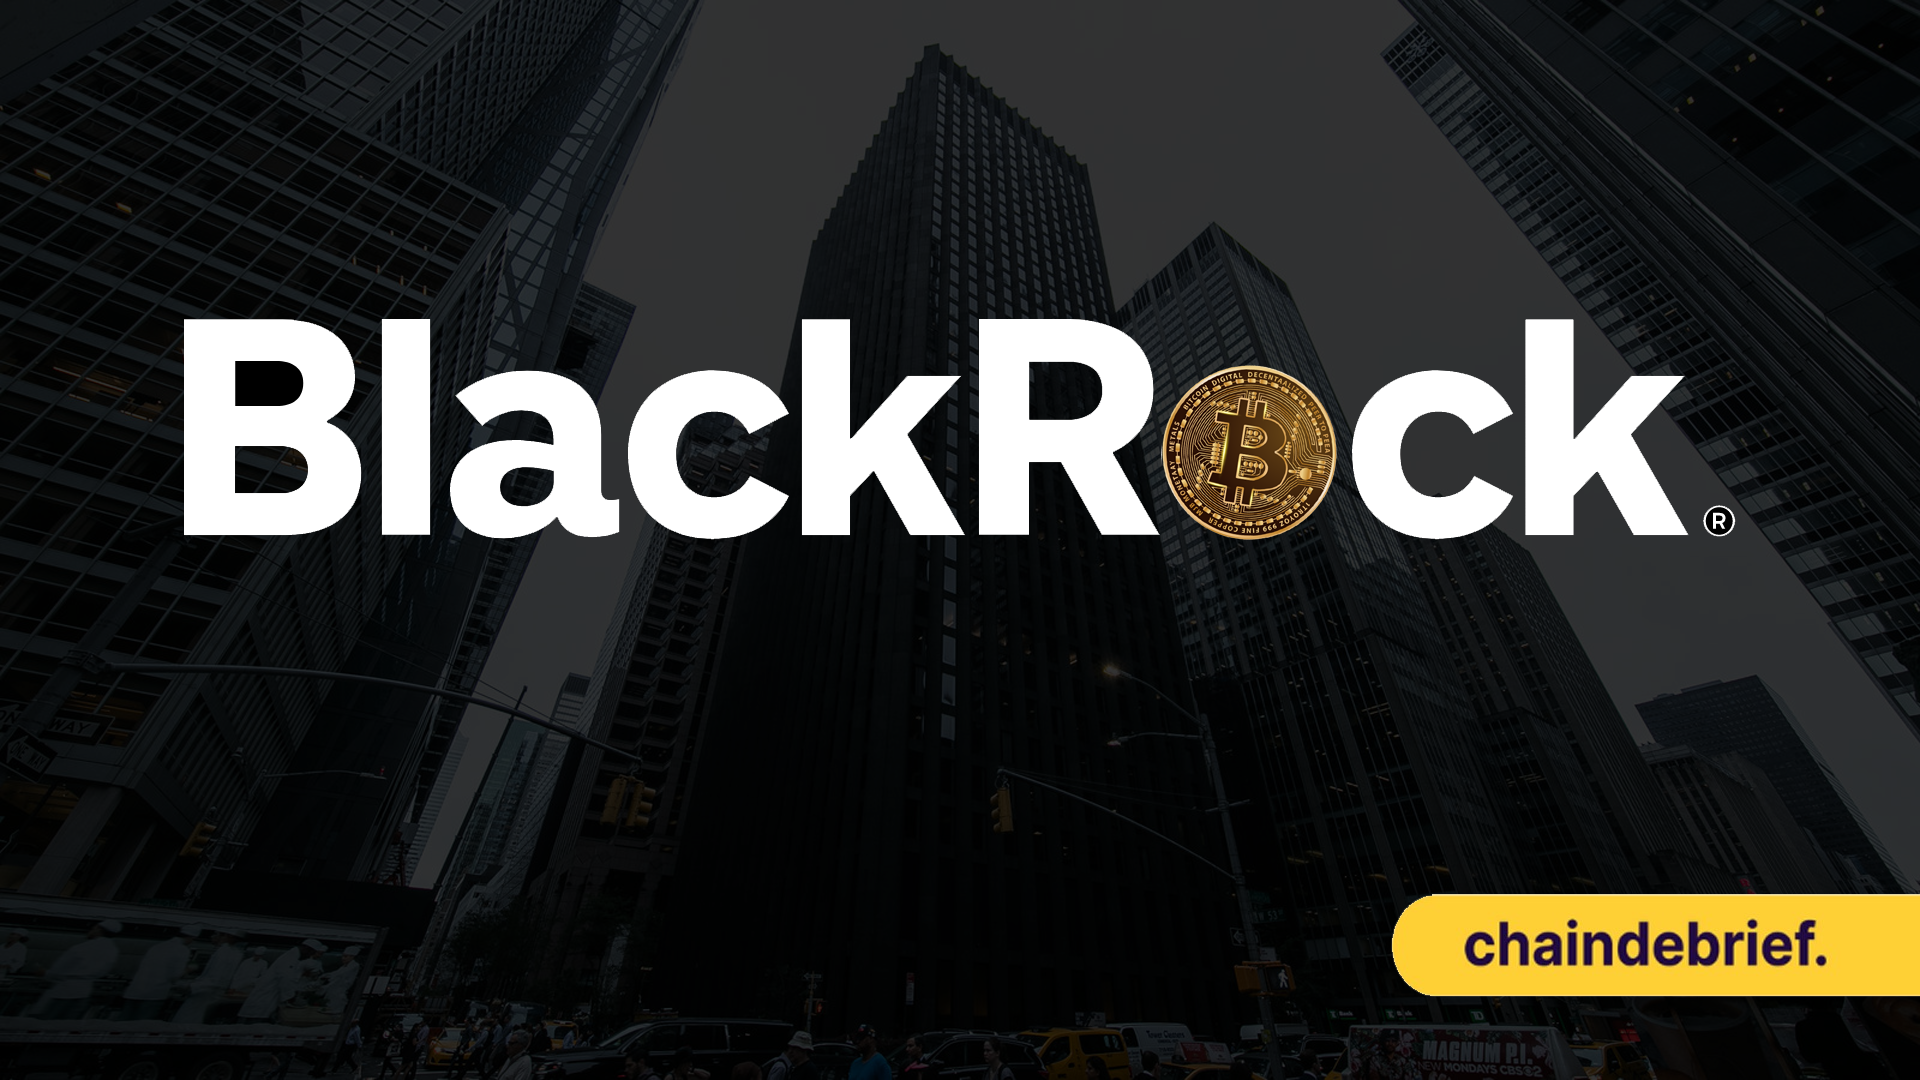 BlackRock Bitcoin SPOT ETF - all you need to know